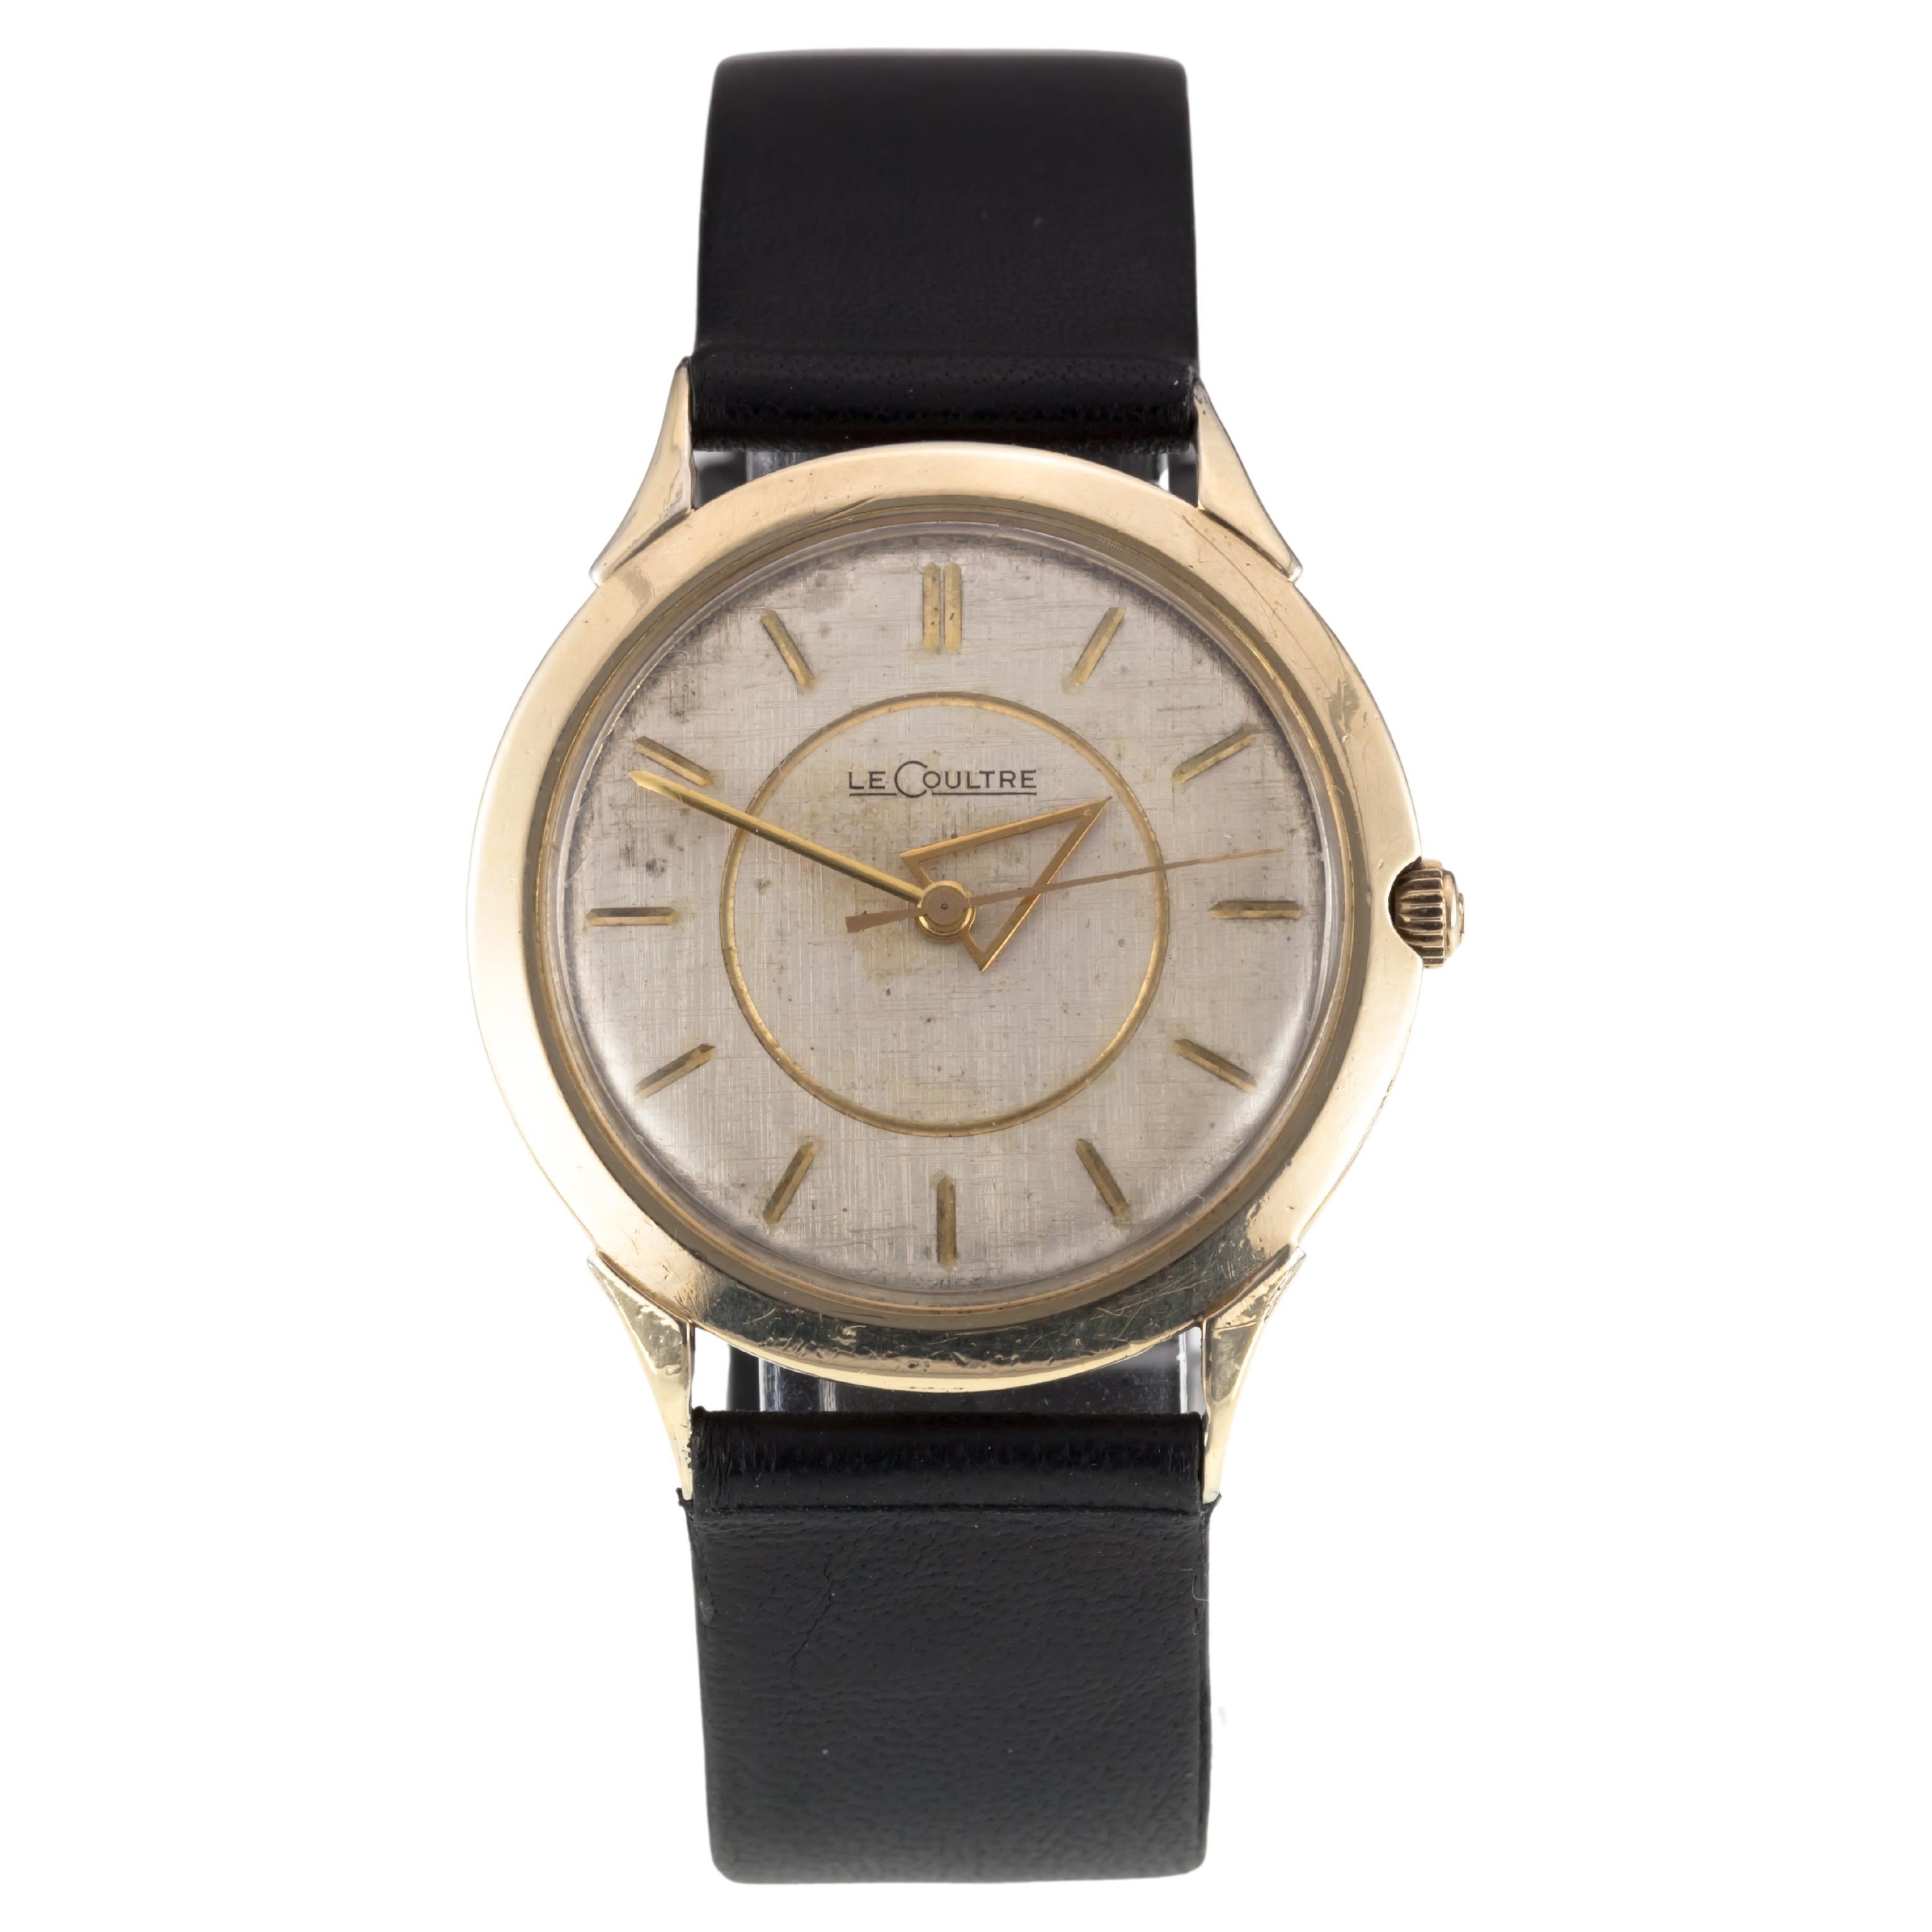 Le Coultre Men's Gold-Filled Hand-Winding Watch w/ Leather Strap Unique Hands!